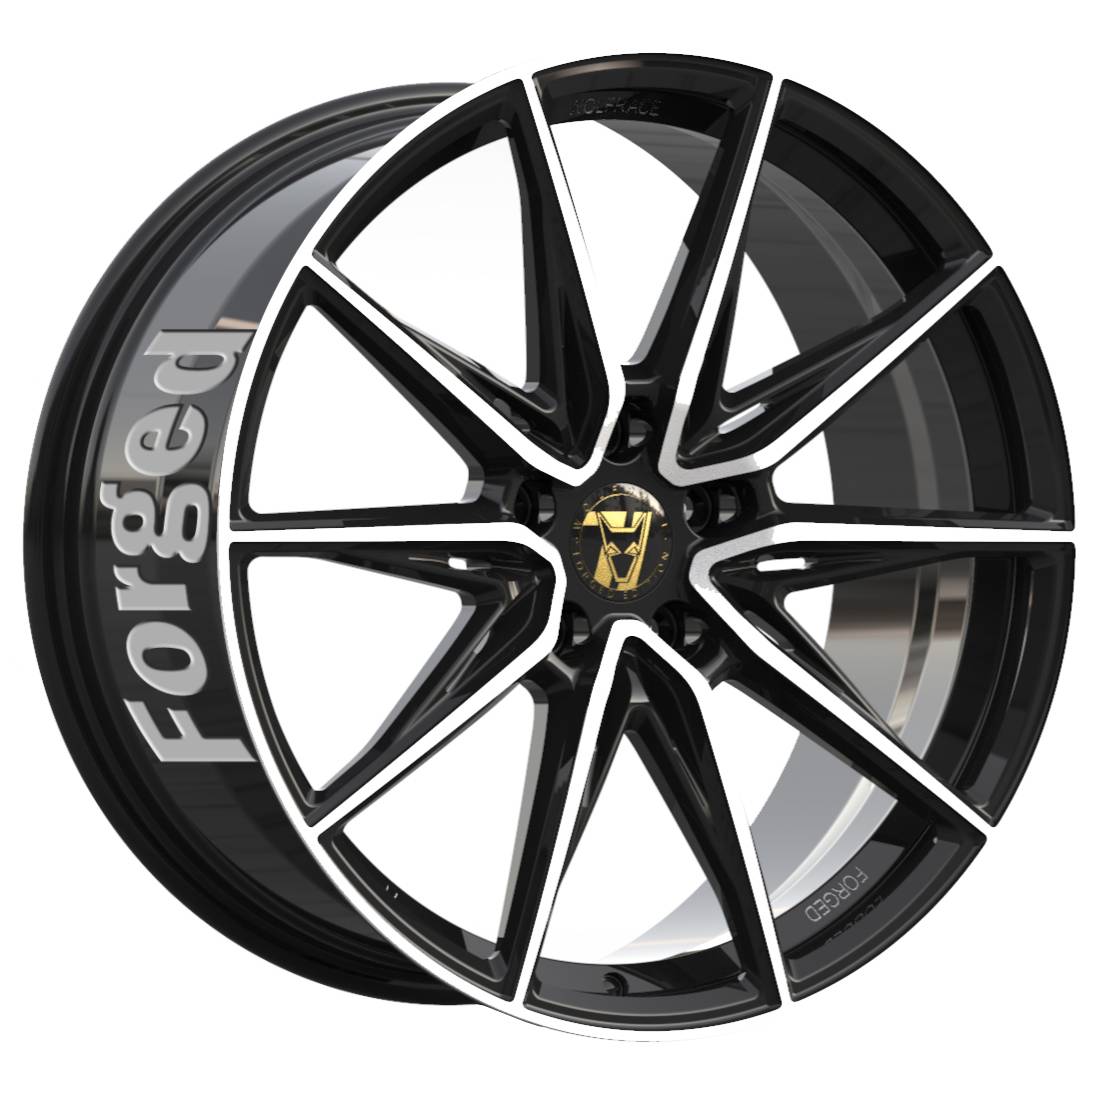 Jantes alu Demon Wheels 71 Forged Edition Urban Racer Forged [12x24] -5x114.3- ET 45